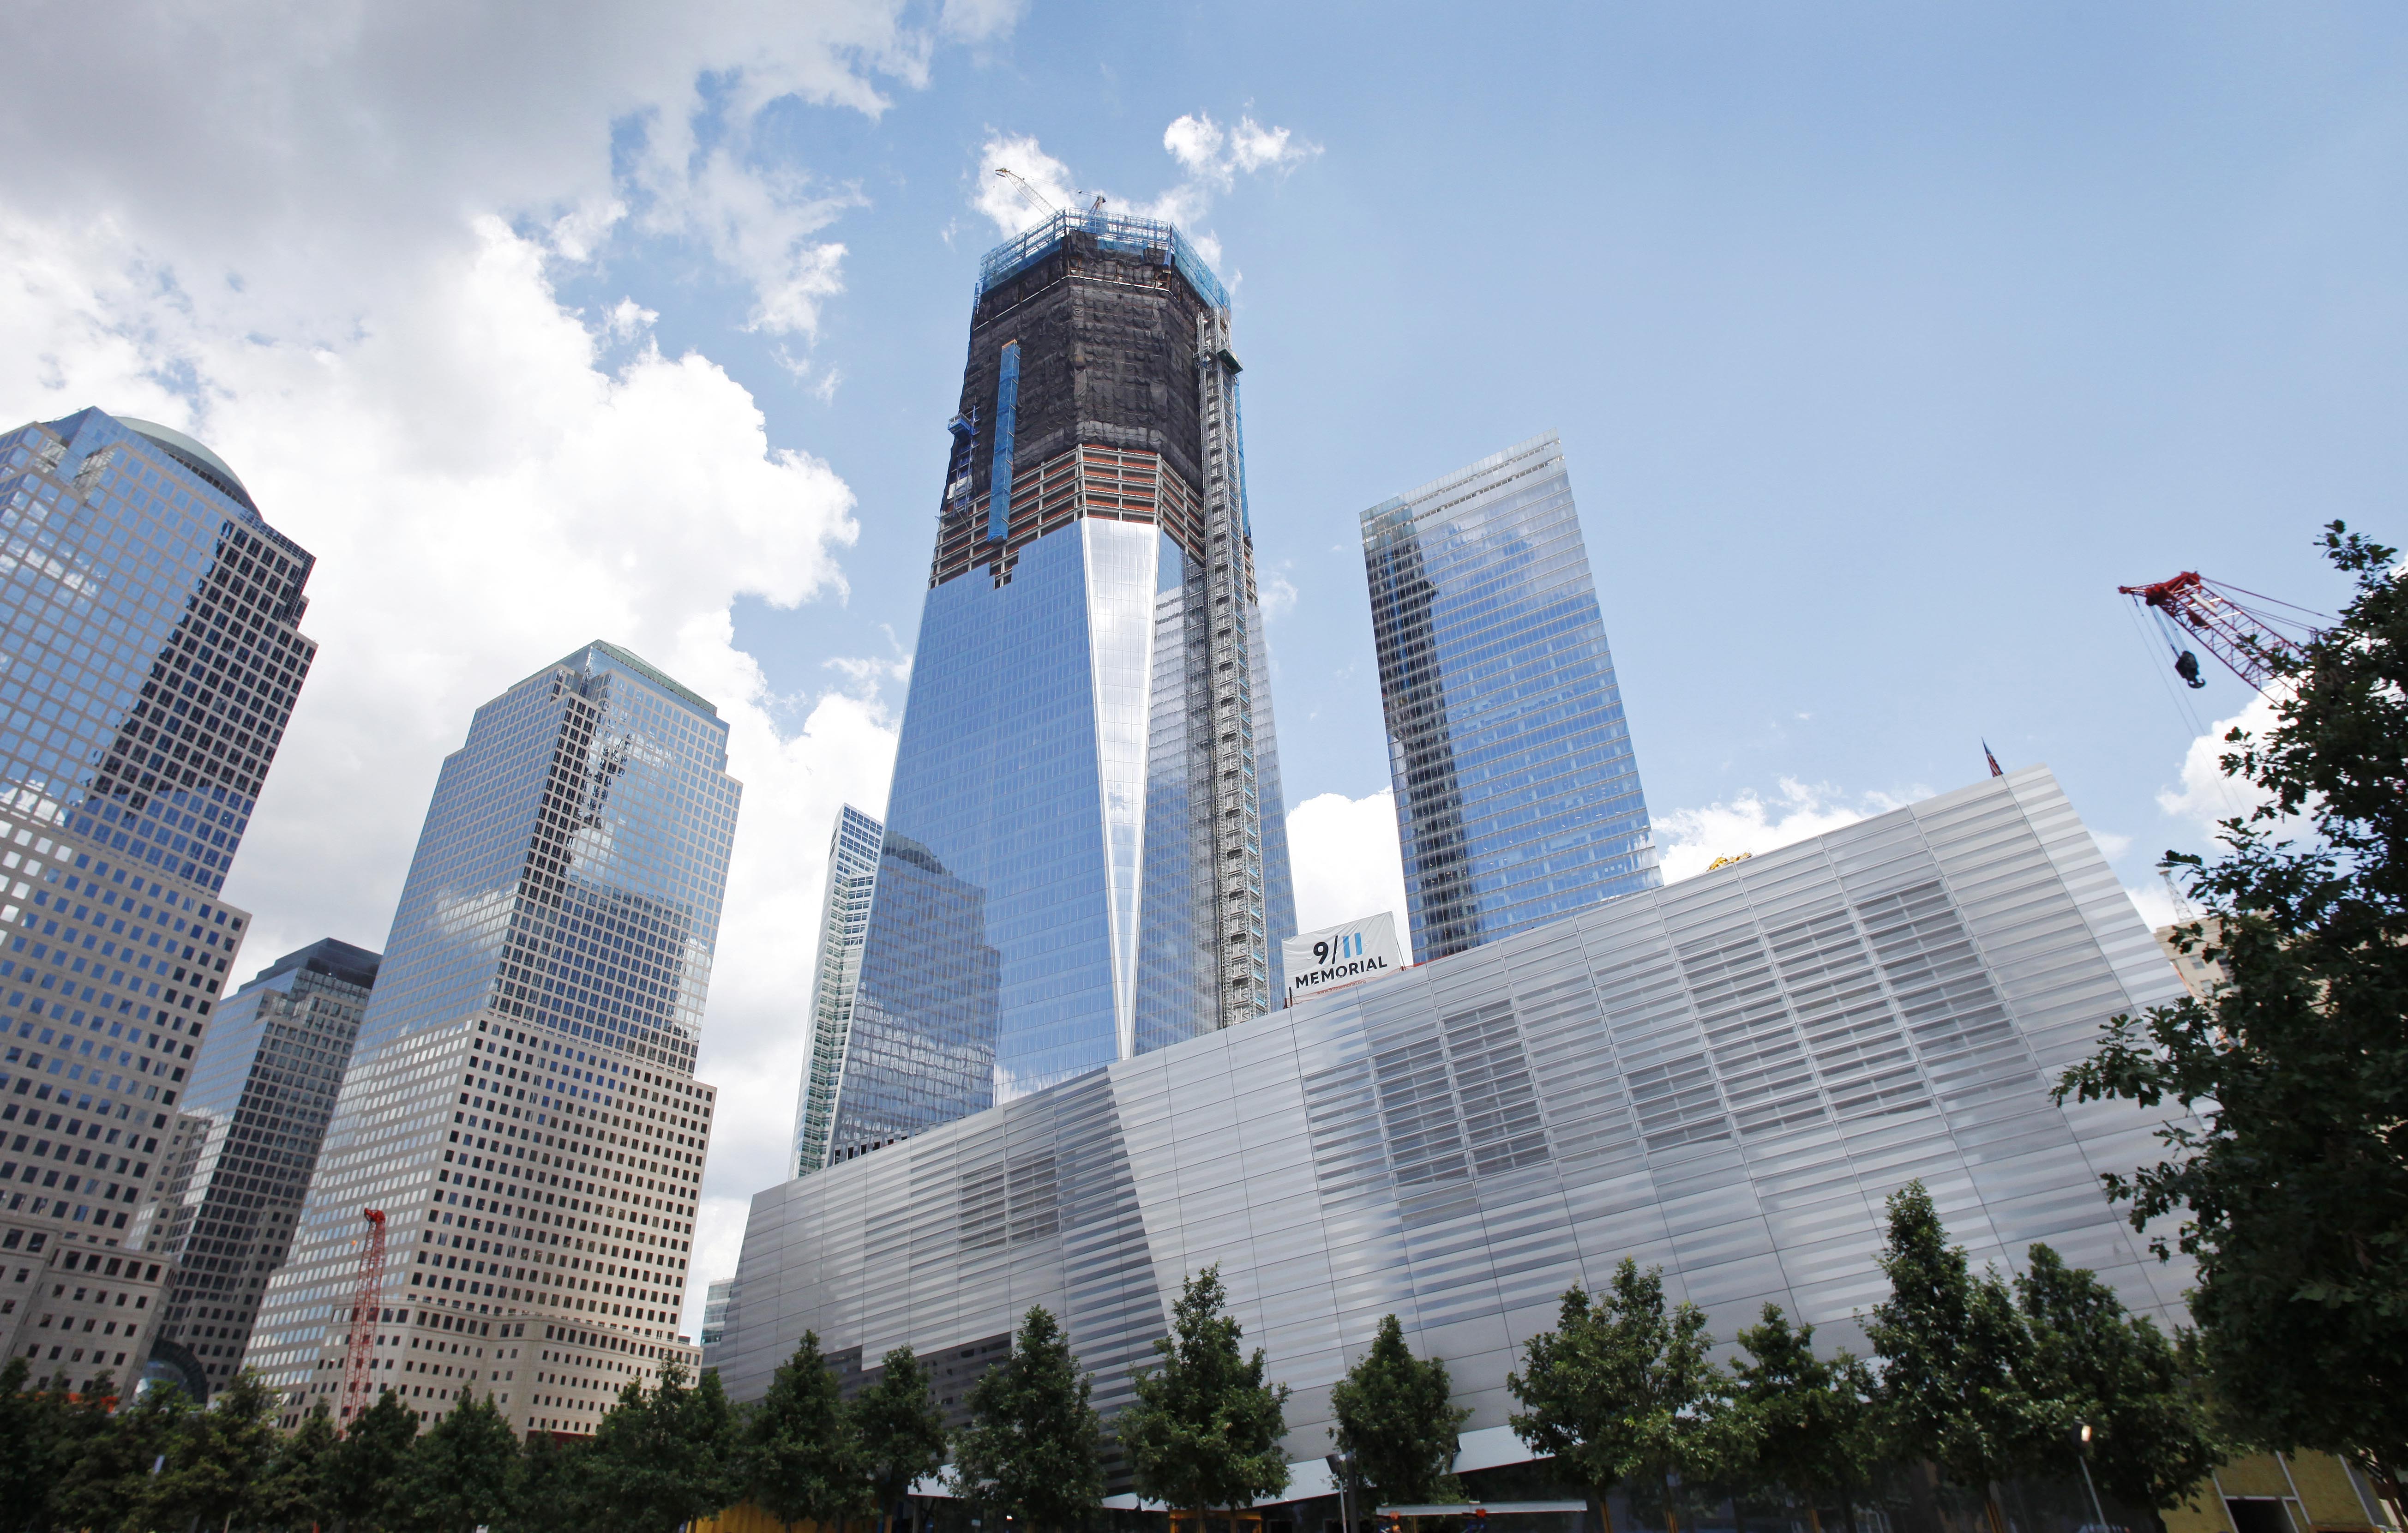 Work continues on the National September 11 Memorial at the World Trade Center site, Friday, July 15, 2011 in New York.  The memorial will be dedicated in a ceremony on September 11, 2011, the tenth anniversary of the terrorist attacks. One World Trade Center, center, rises above the site. (AP Photo/Mark Lennihan)